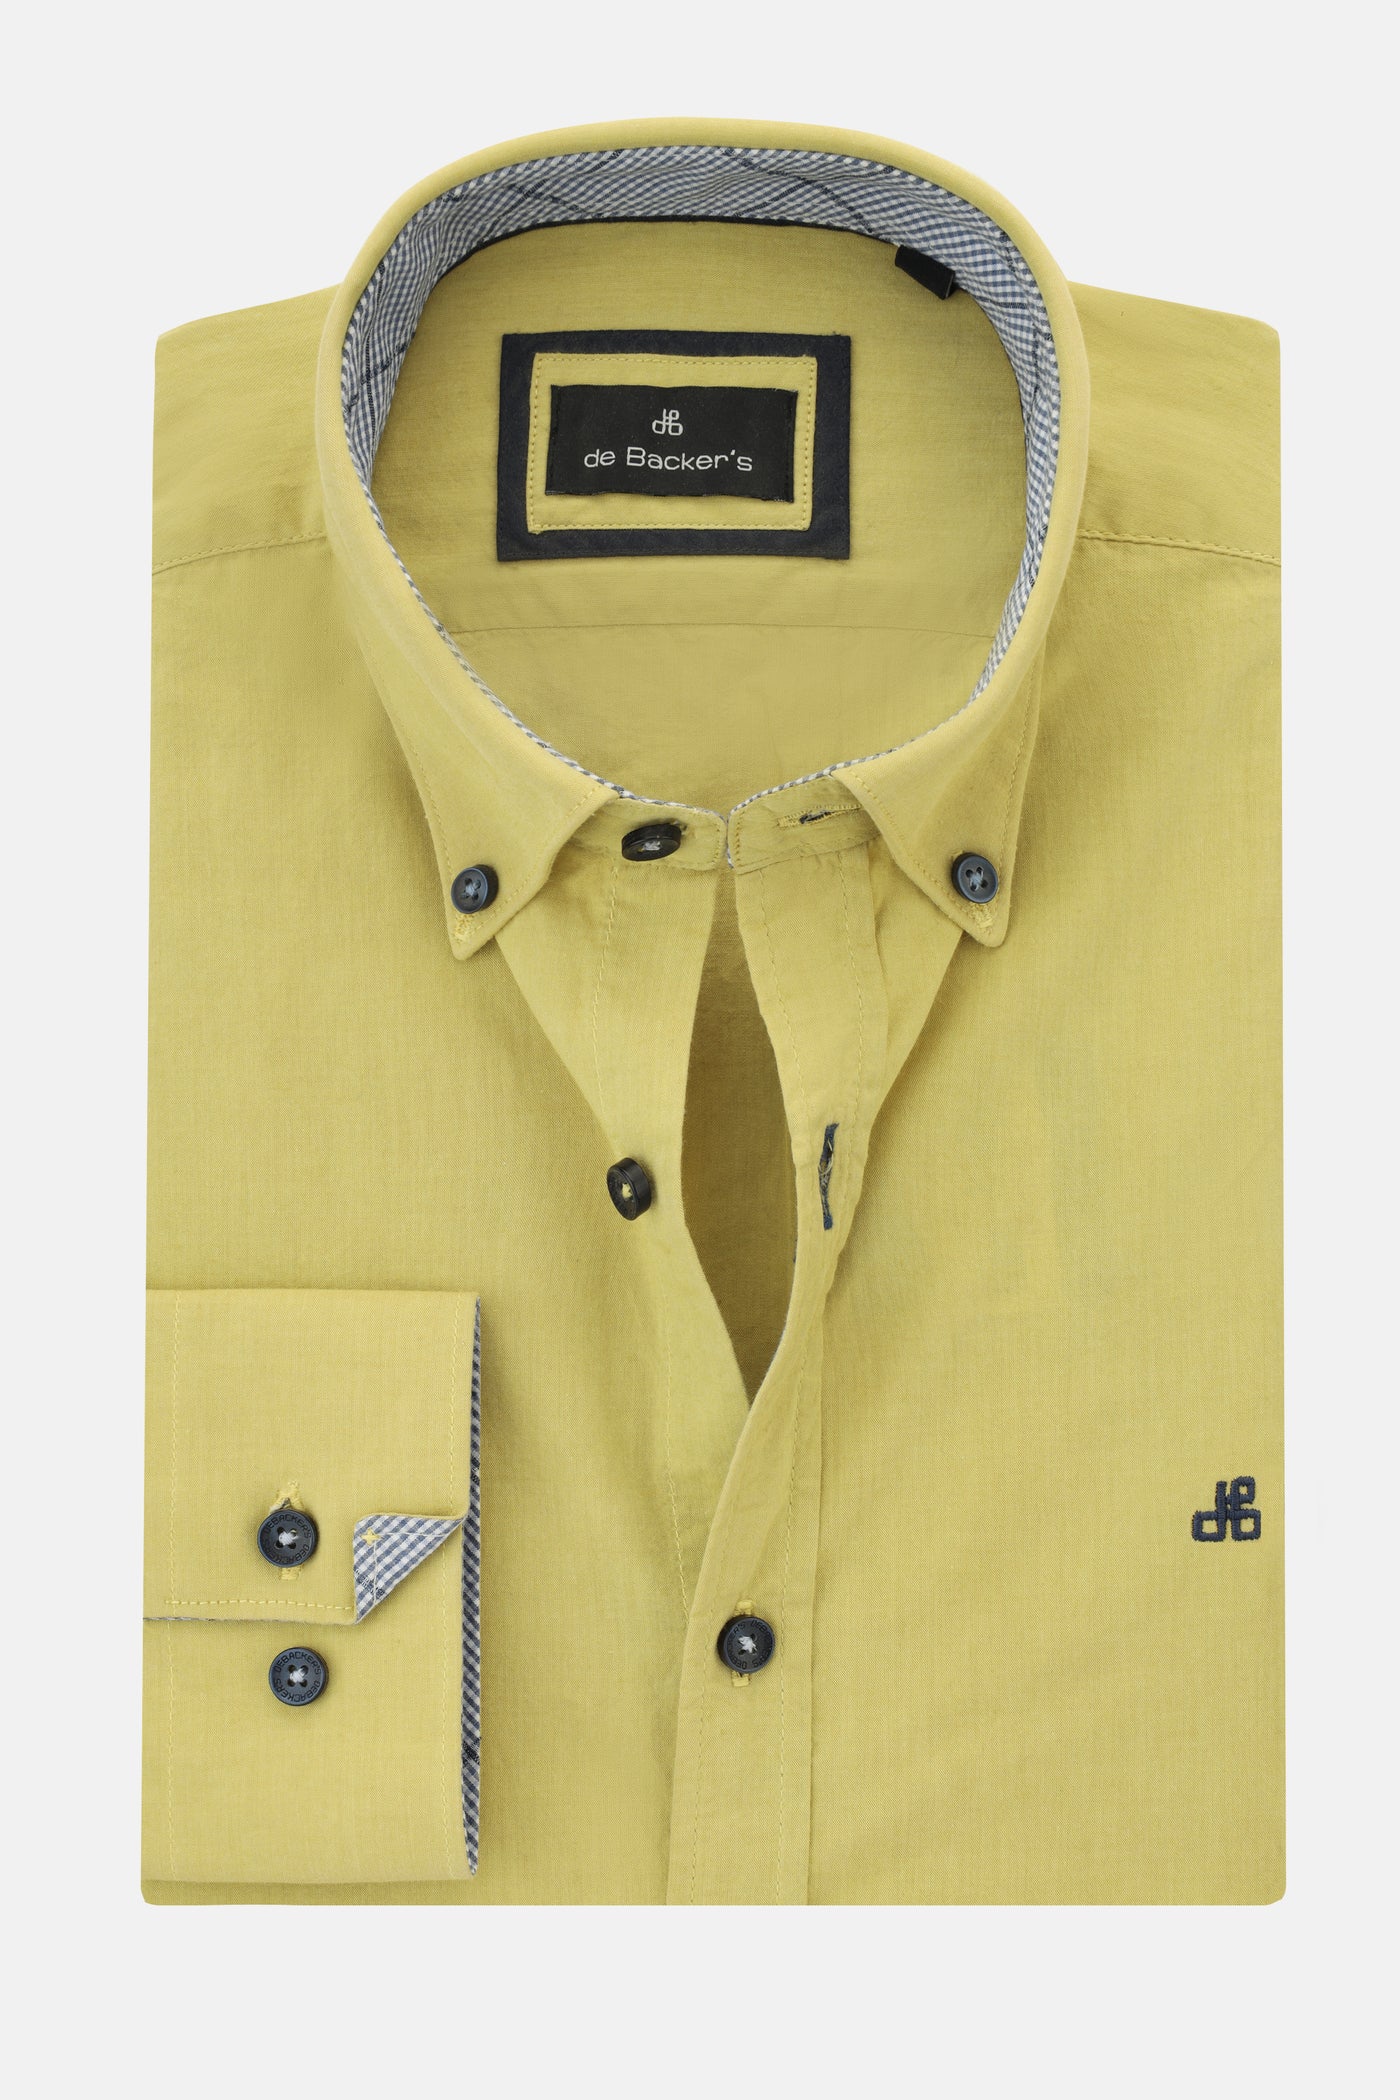 Solid Citron Yellow Smart Casual Shirt